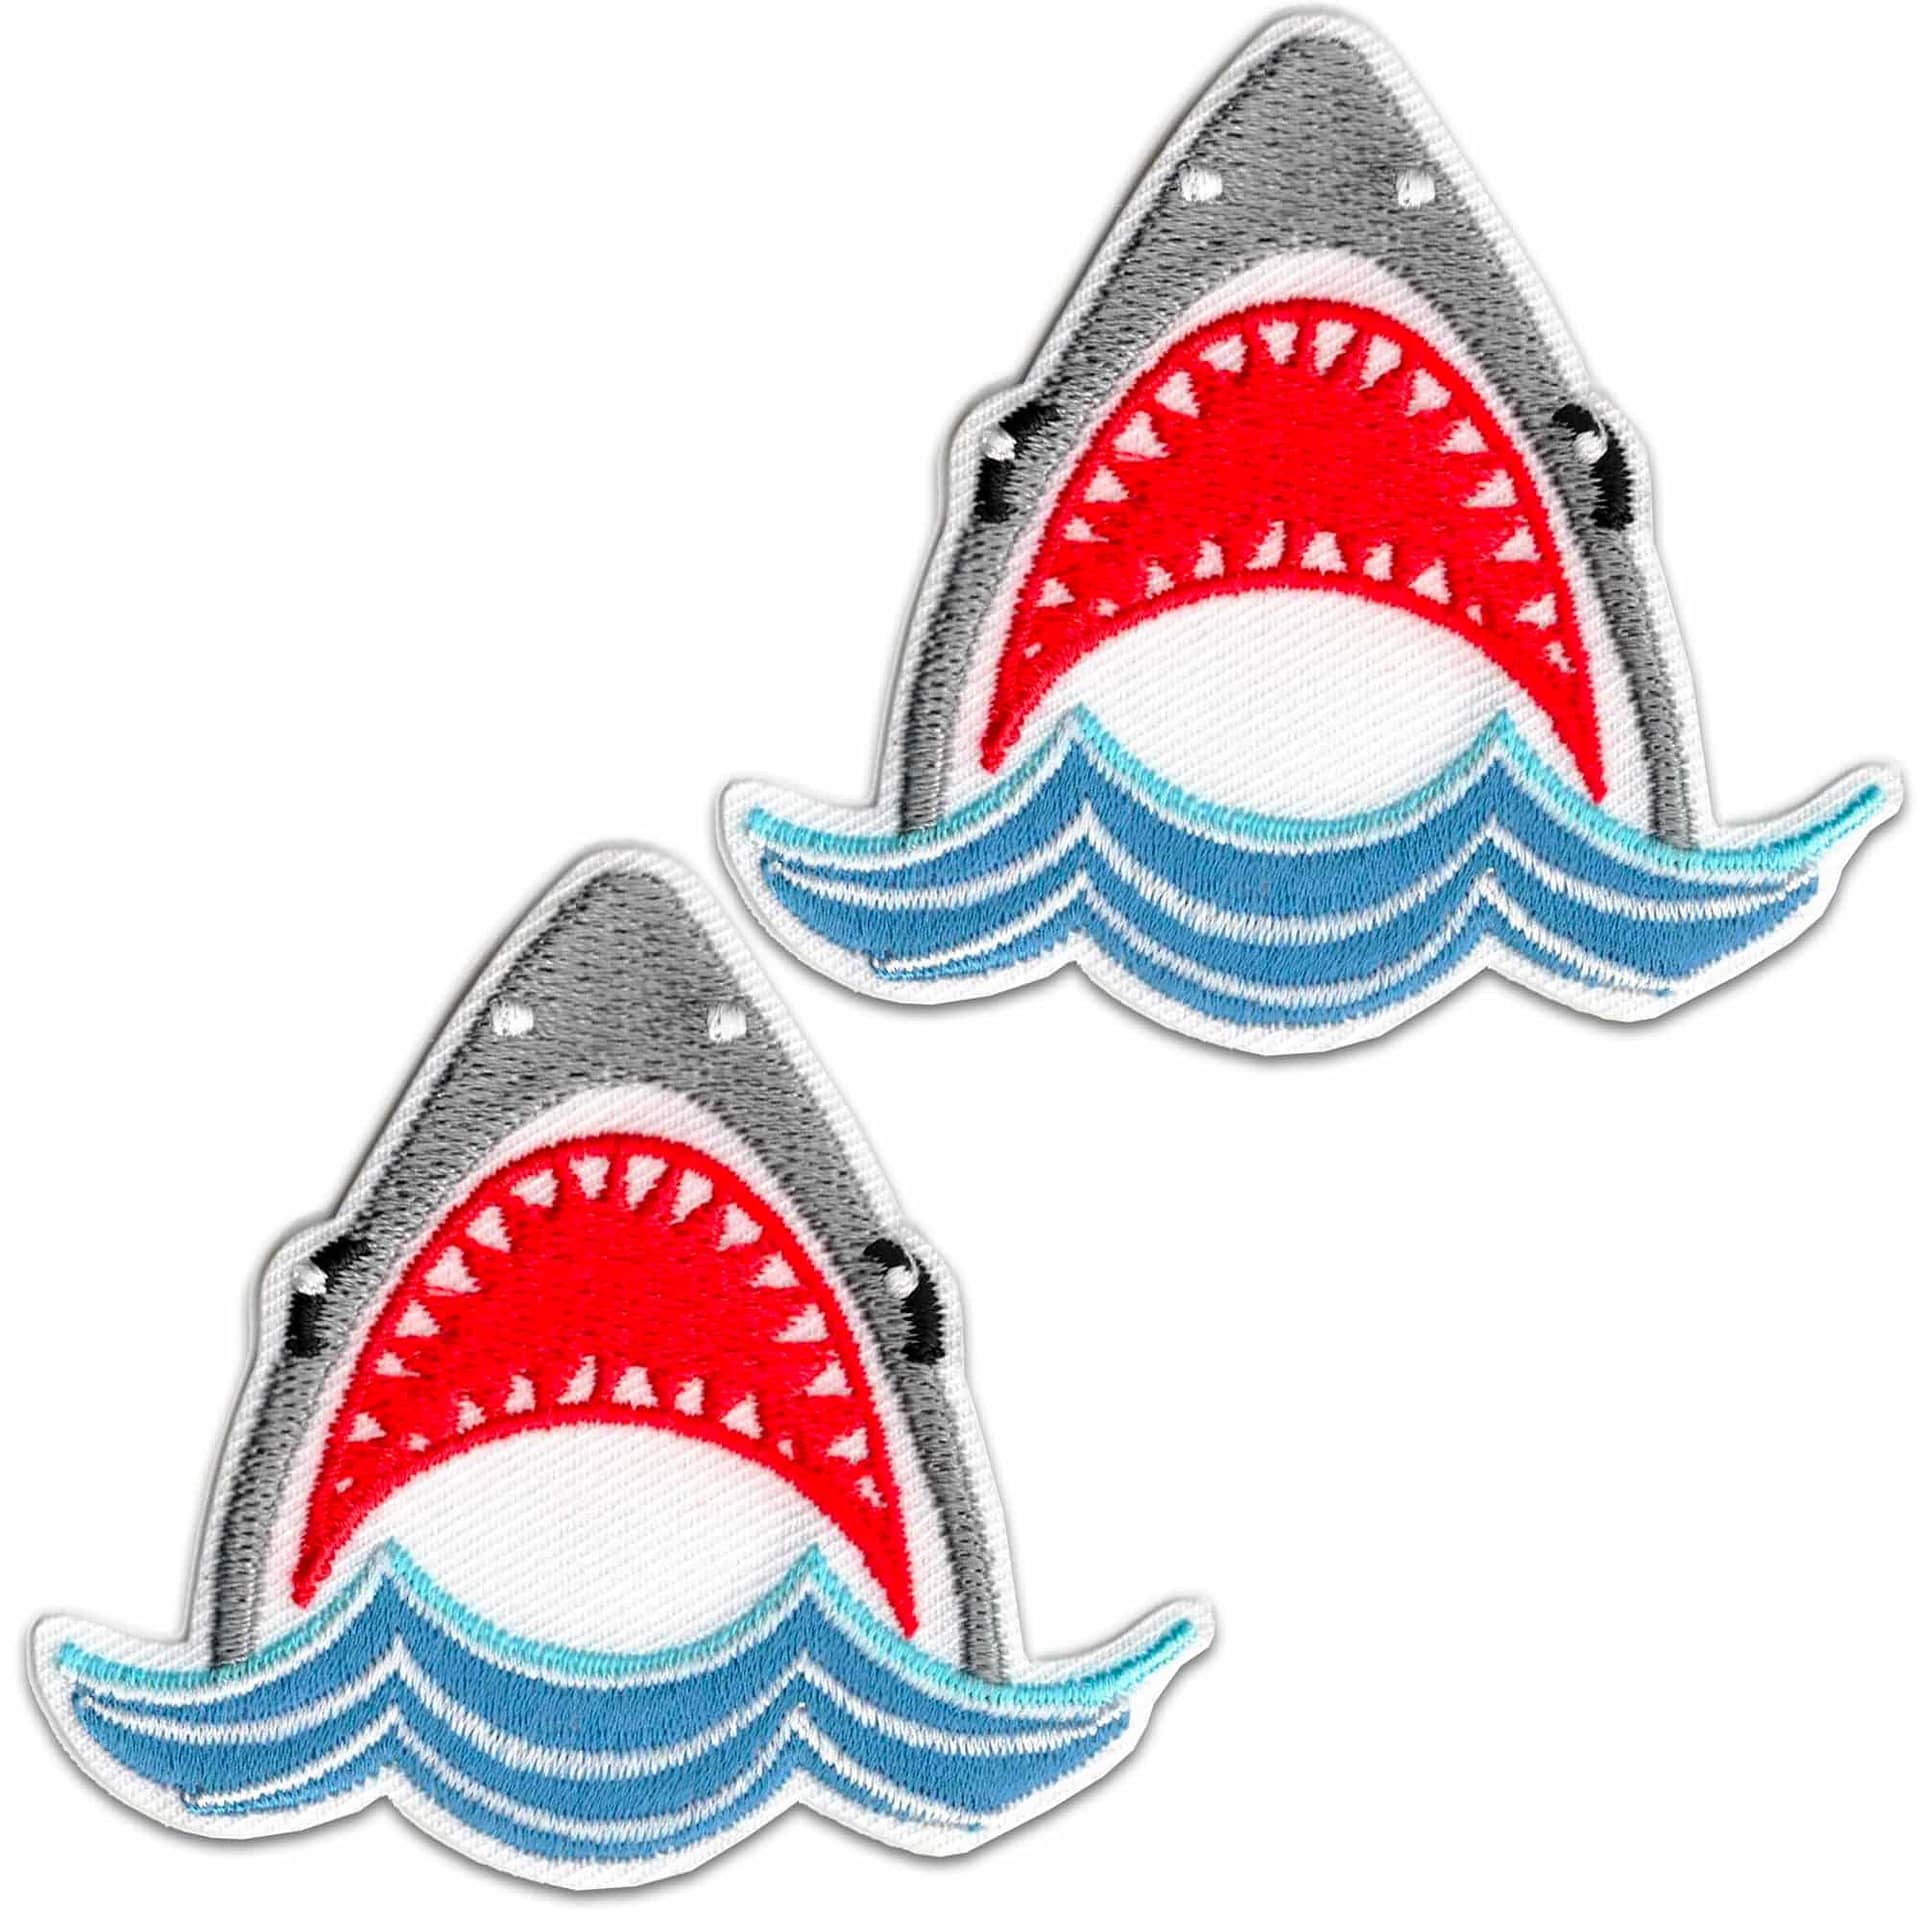 Powerful Great White Shark Multi-Color Embroidered Iron-On or Hook & Loop  Patch Applique